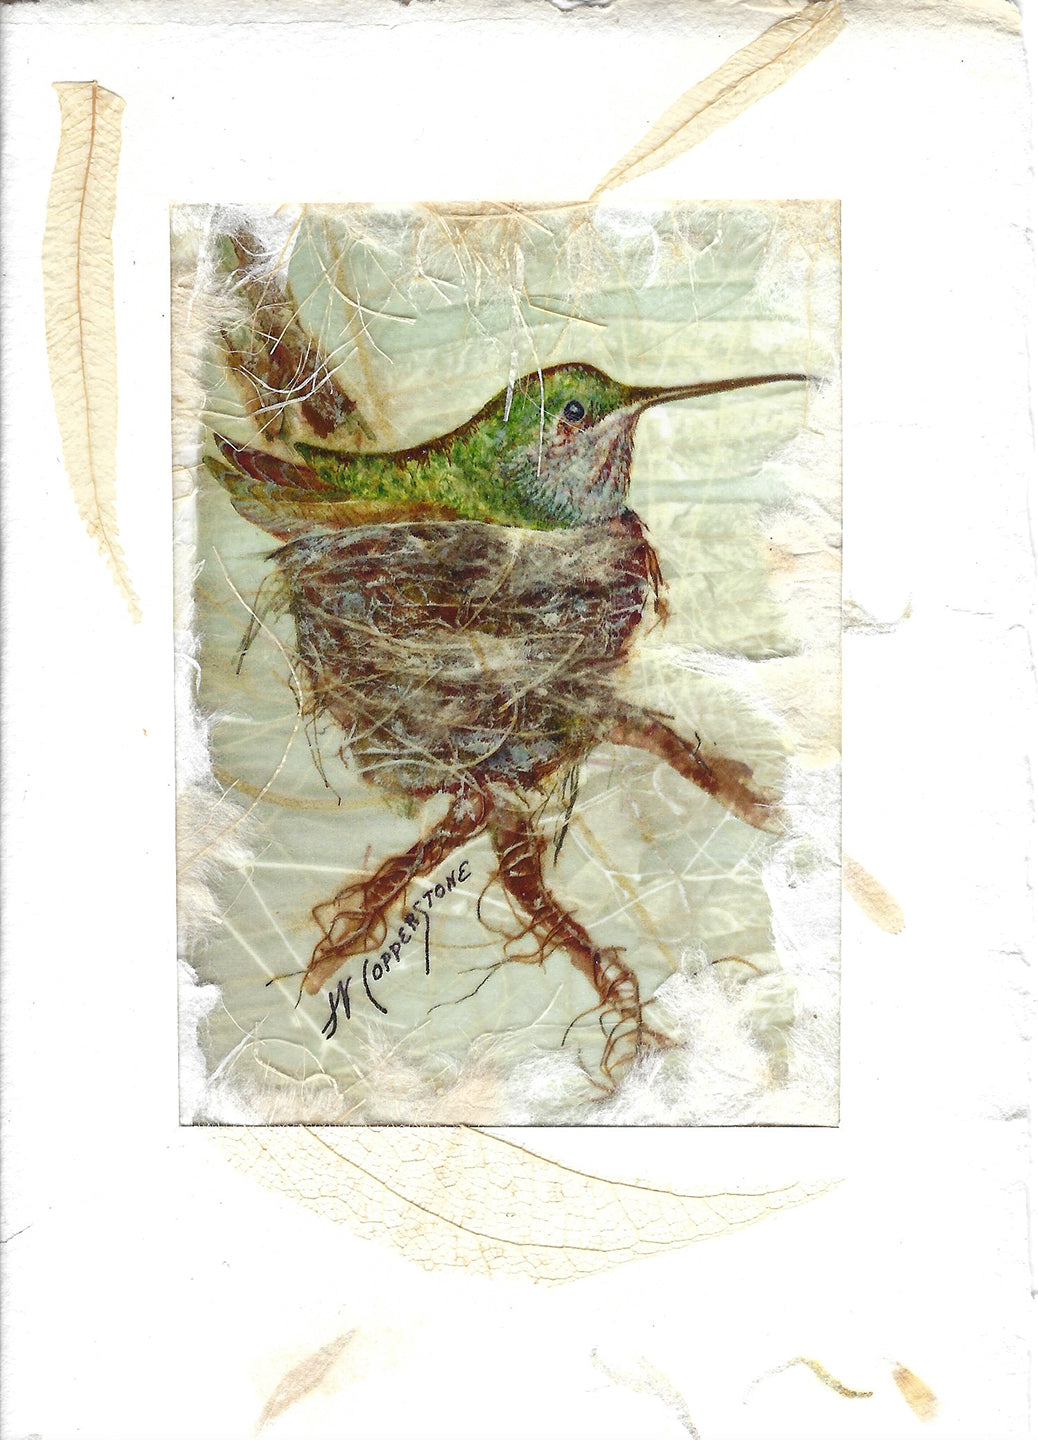 Costa Hummingbird - Blank greeting card by Janice A. Copperstone of Milford, Mich.  